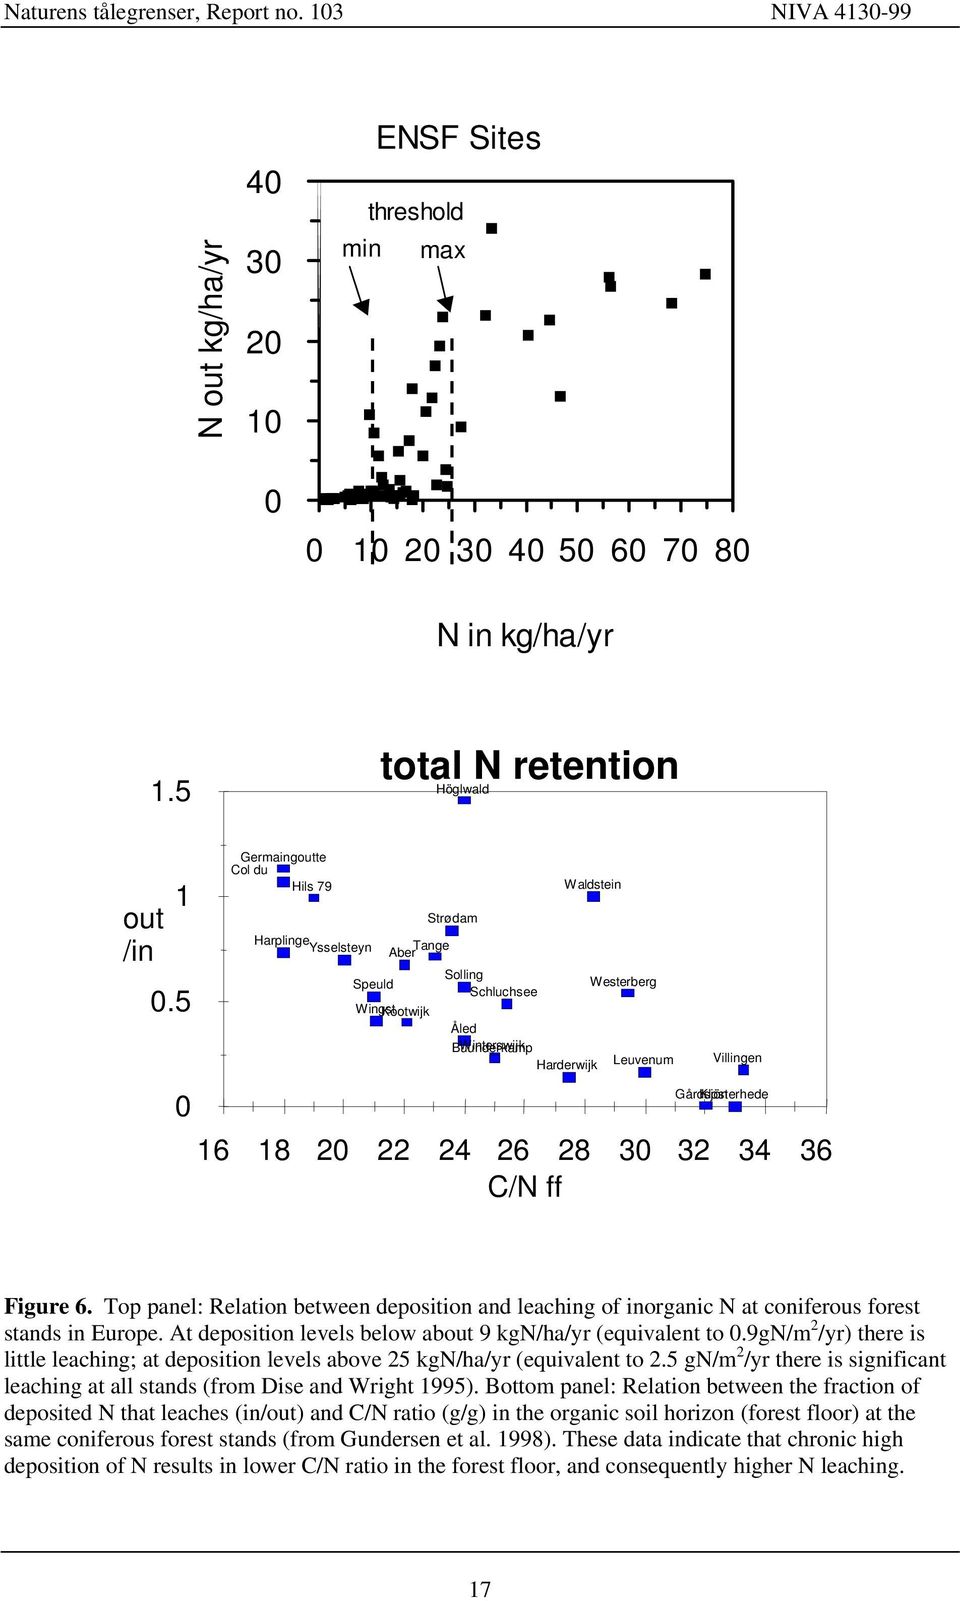 Gårdsjön Klosterhede 0 16 18 20 22 24 26 28 30 32 34 36 C/N ff Figure 6. Top panel: Relation between deposition and leaching of inorganic N at coniferous forest stands in Europe.